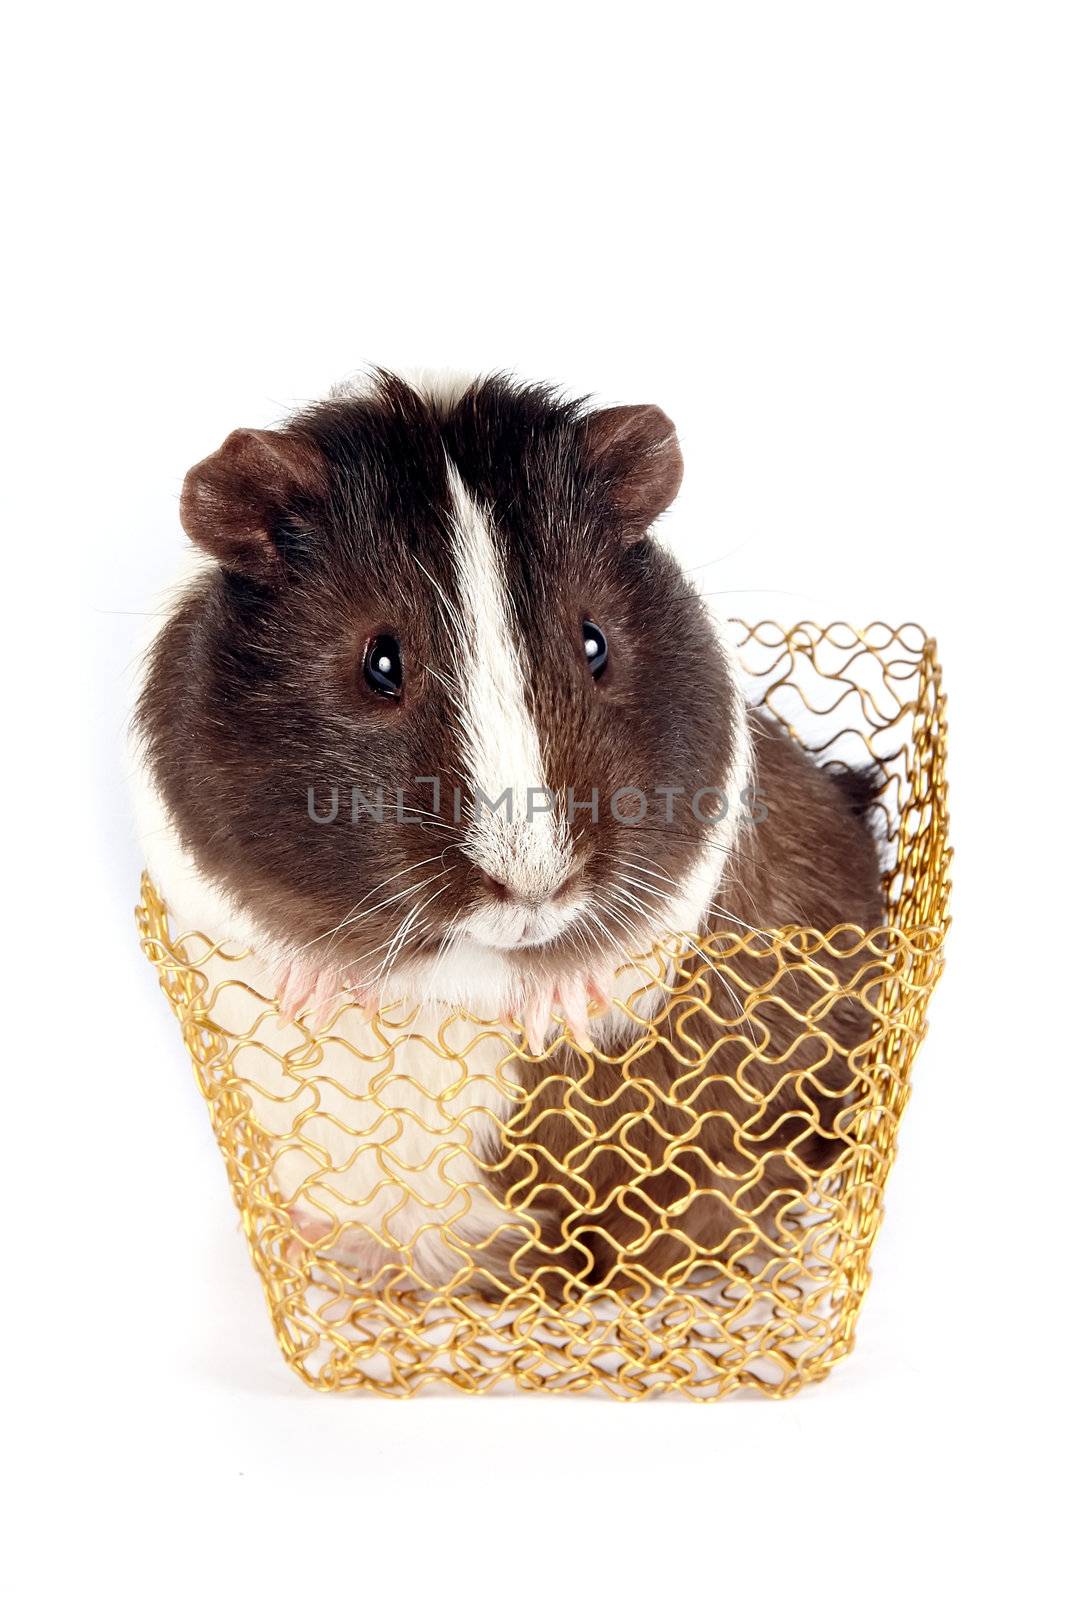 Guinea pigs in a gold basket on a white background